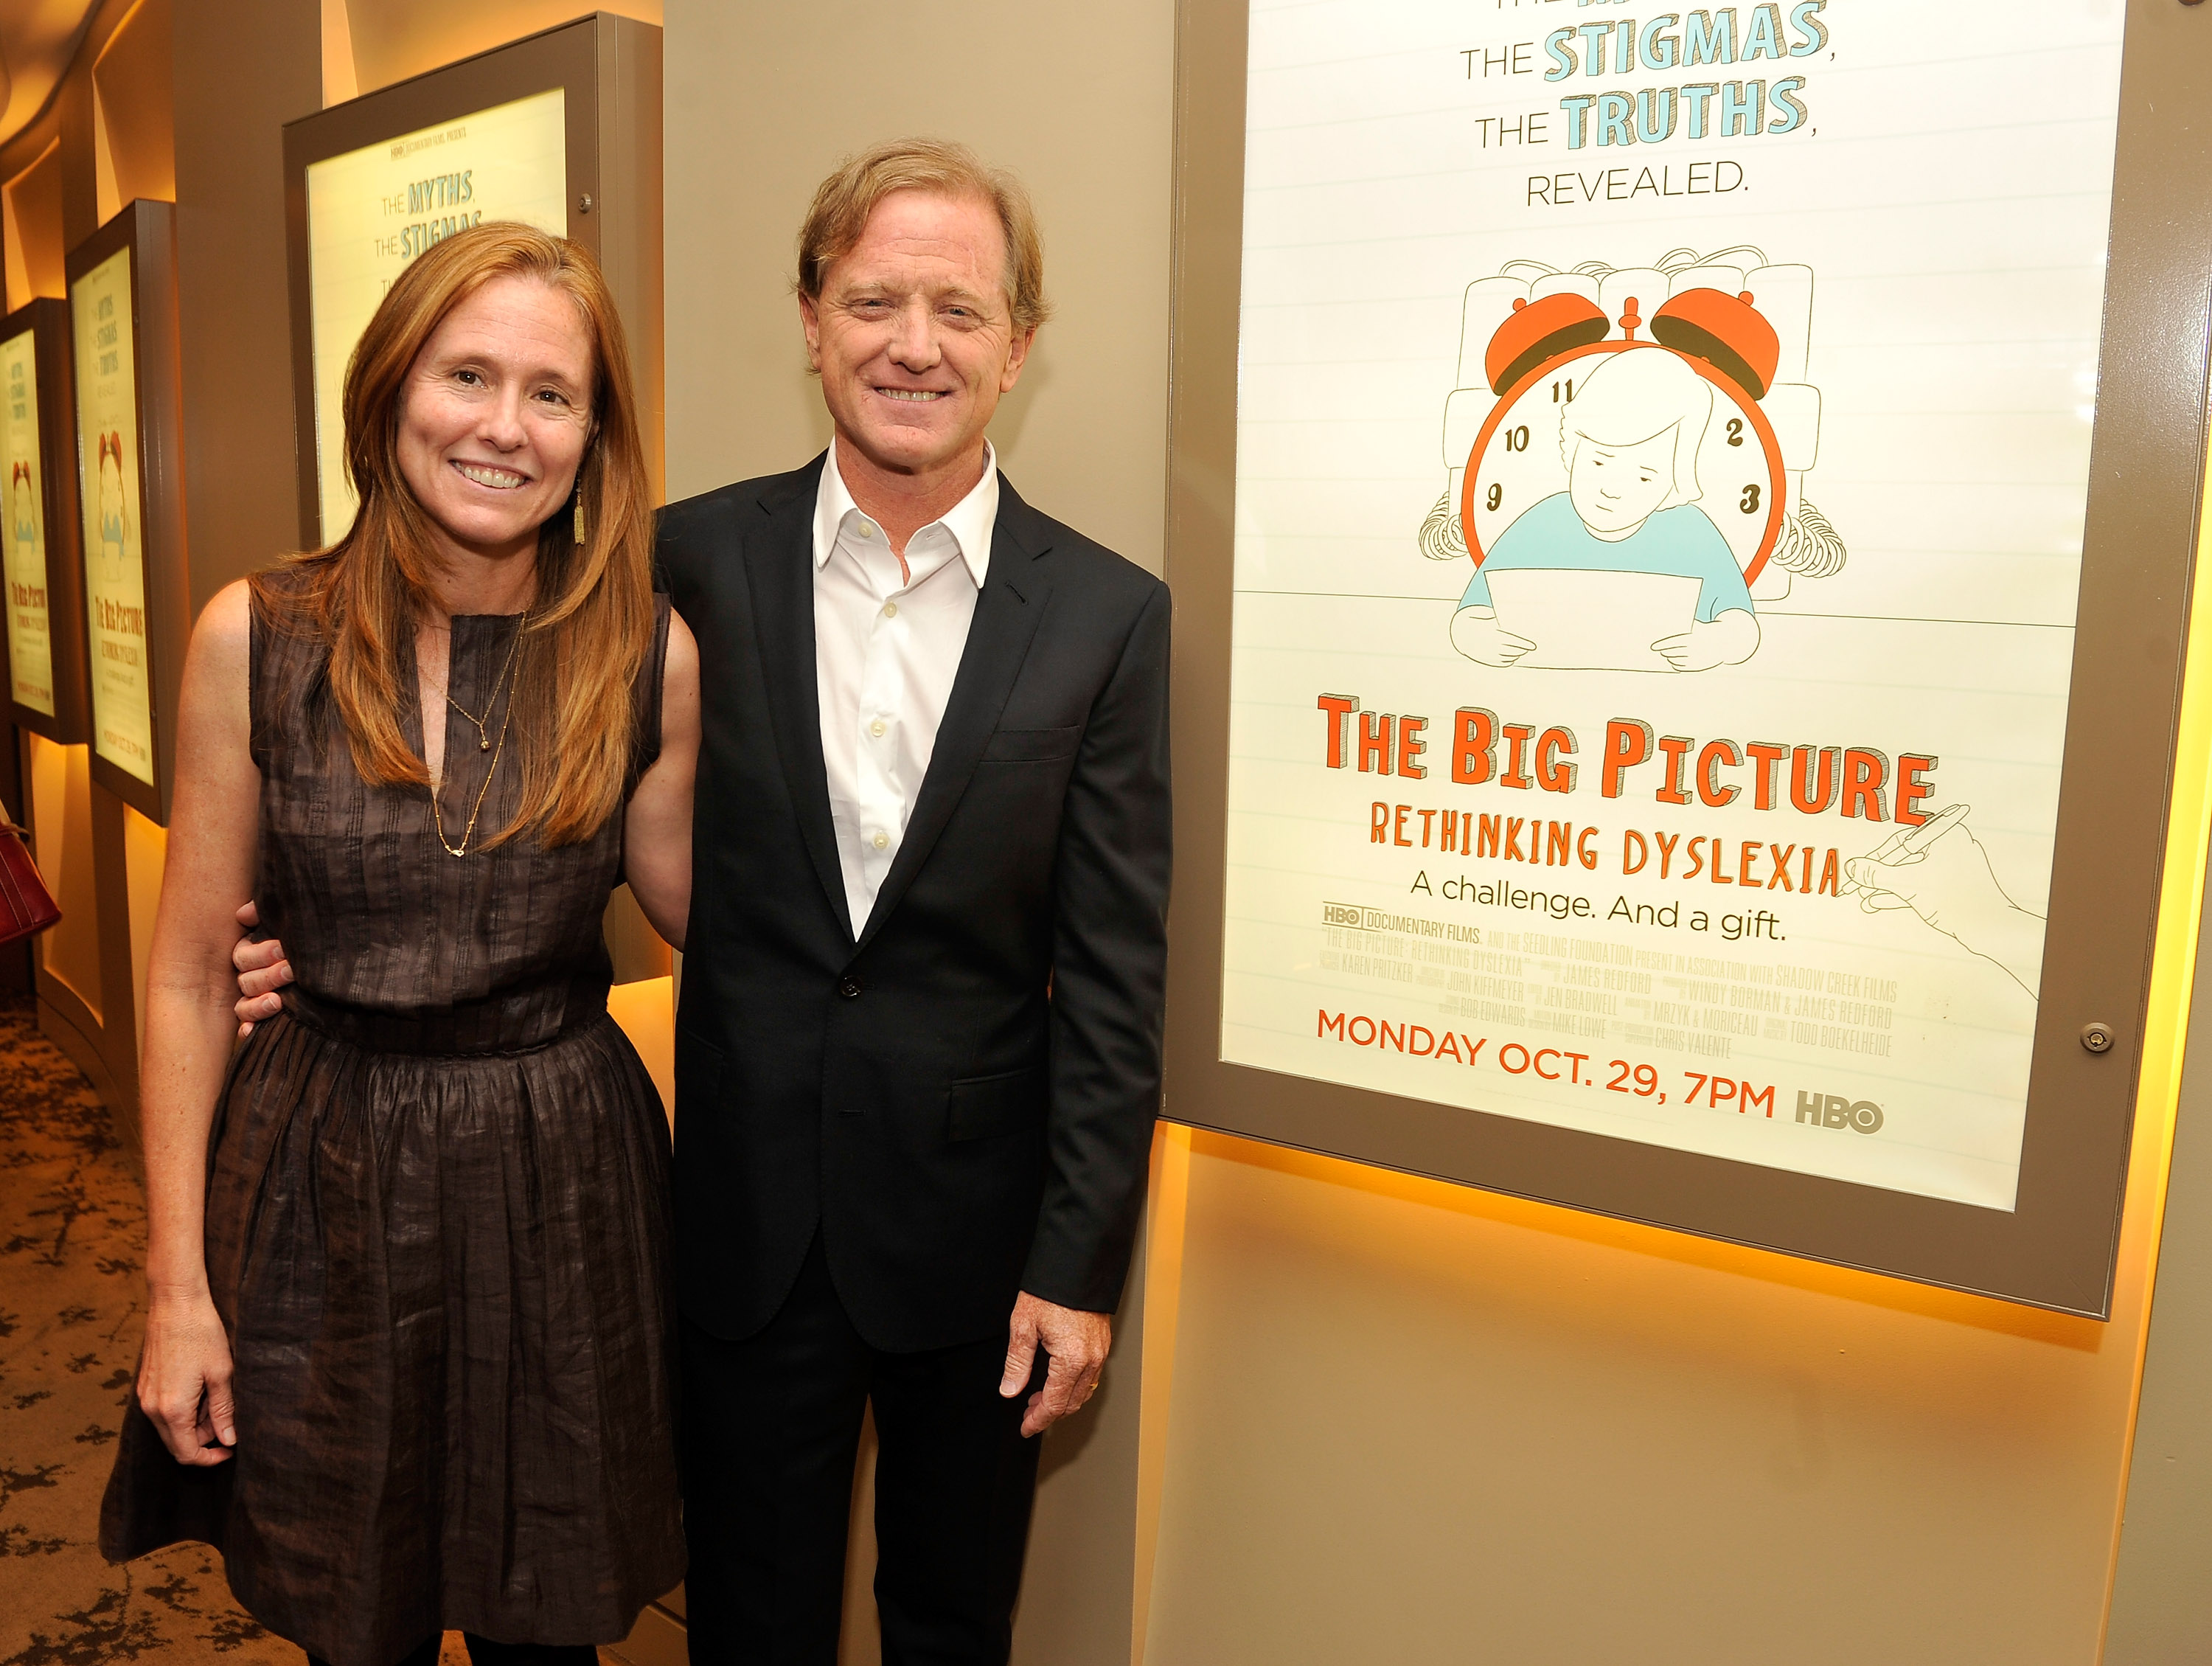 Kyle Redford and James Redford at HBO's New York Premiere of "The Big Picture: Rethinking Dyslexia" in New York City on October 25, 2012.  | Source: Getty Images